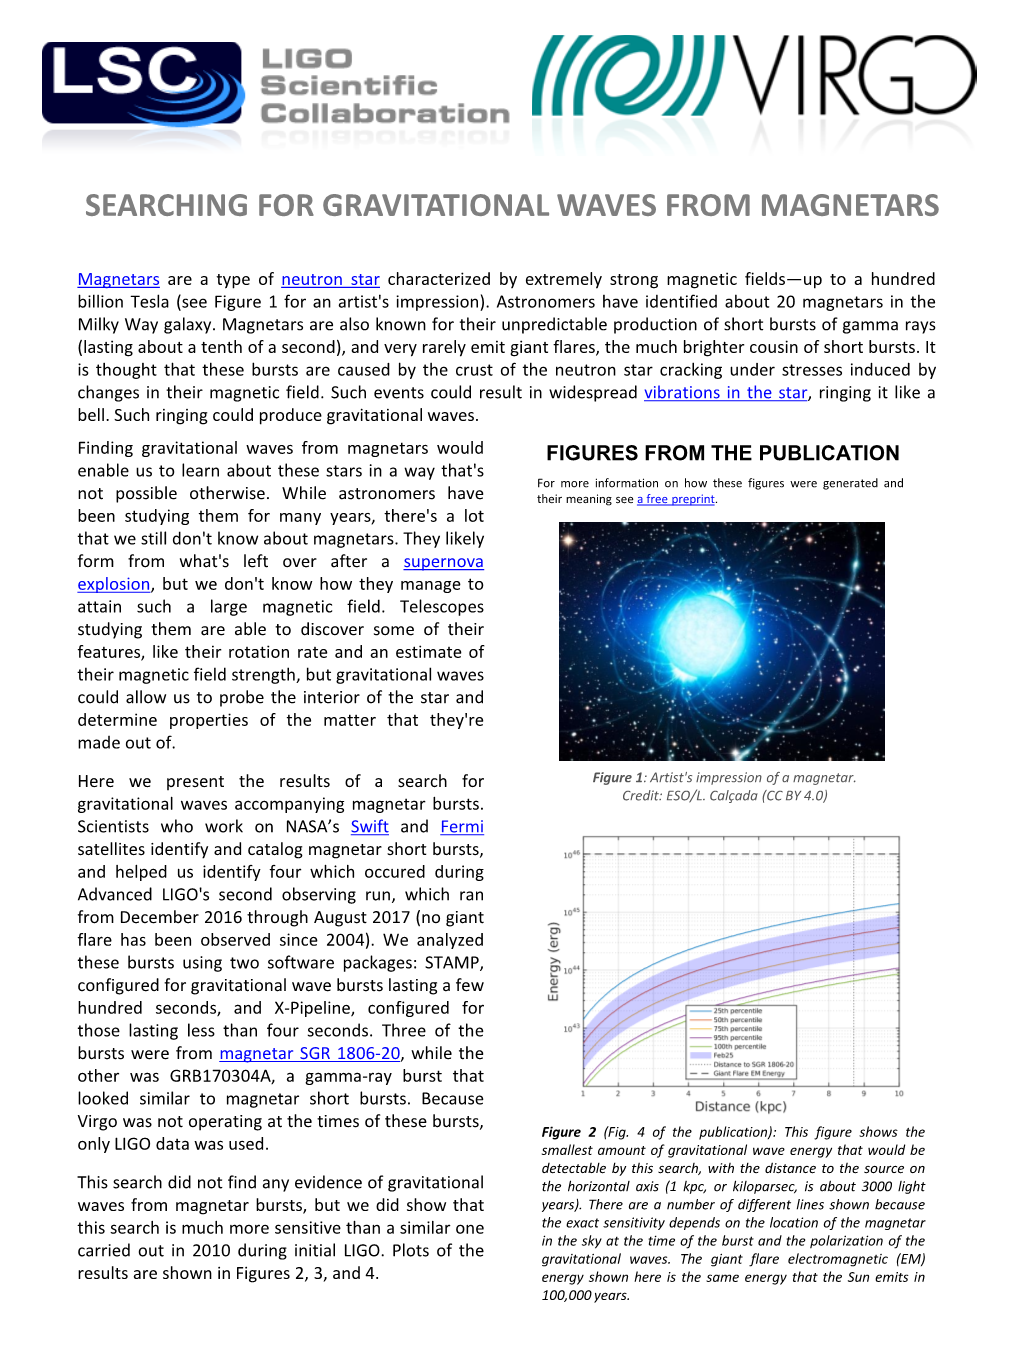 Searching for Gravitational Waves from Magnetars